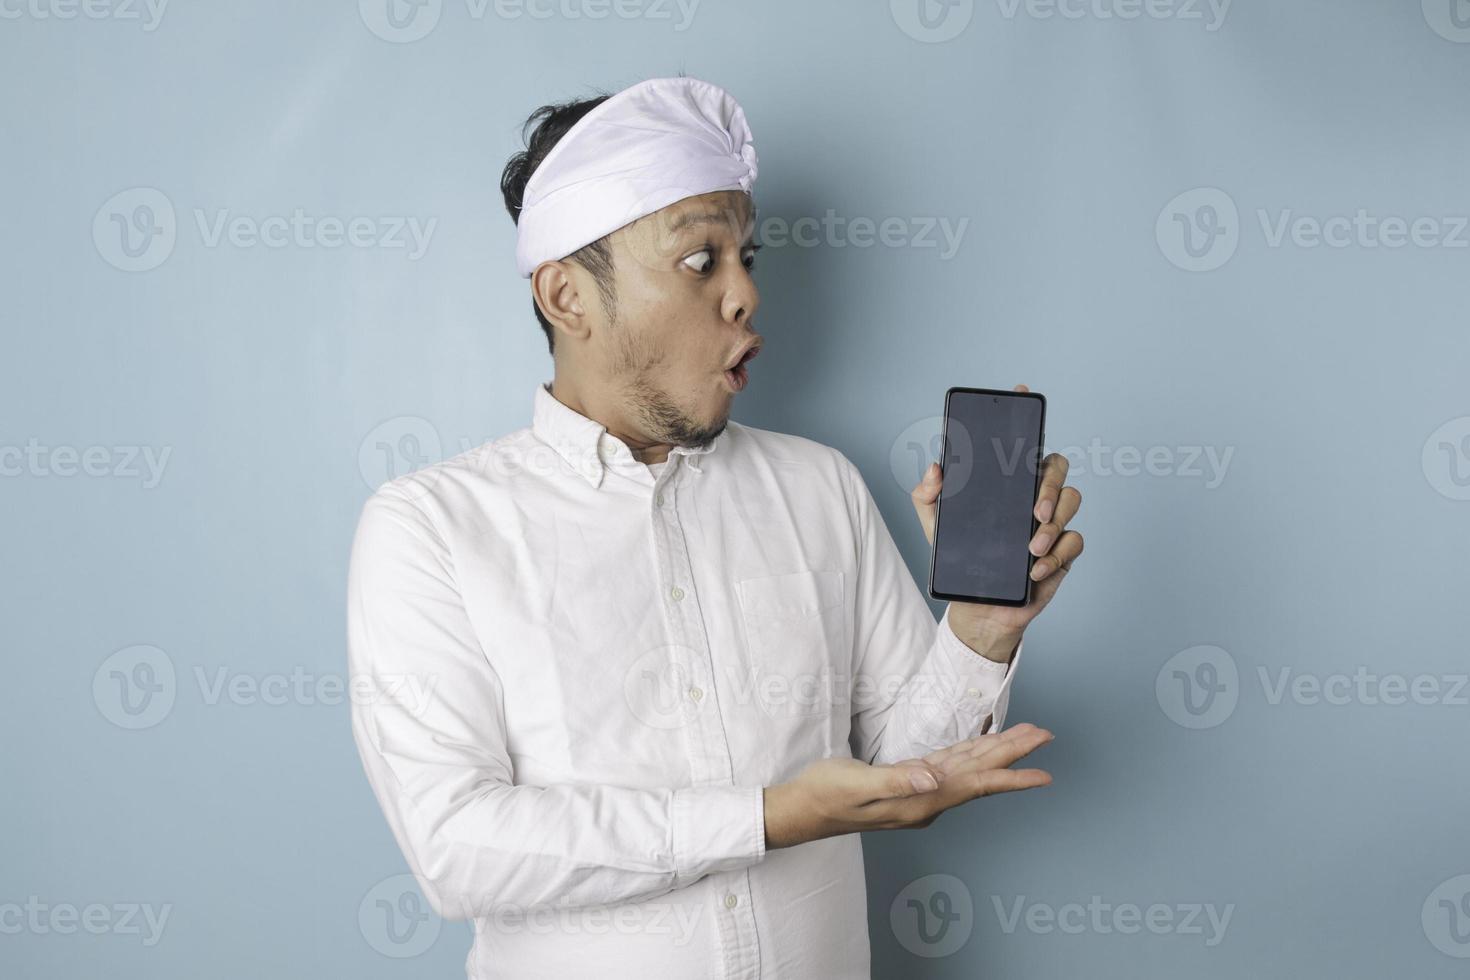 Surprised Balinese man wearing udeng or traditional headband and white shirt holding his smartphone, isolated by blue background photo